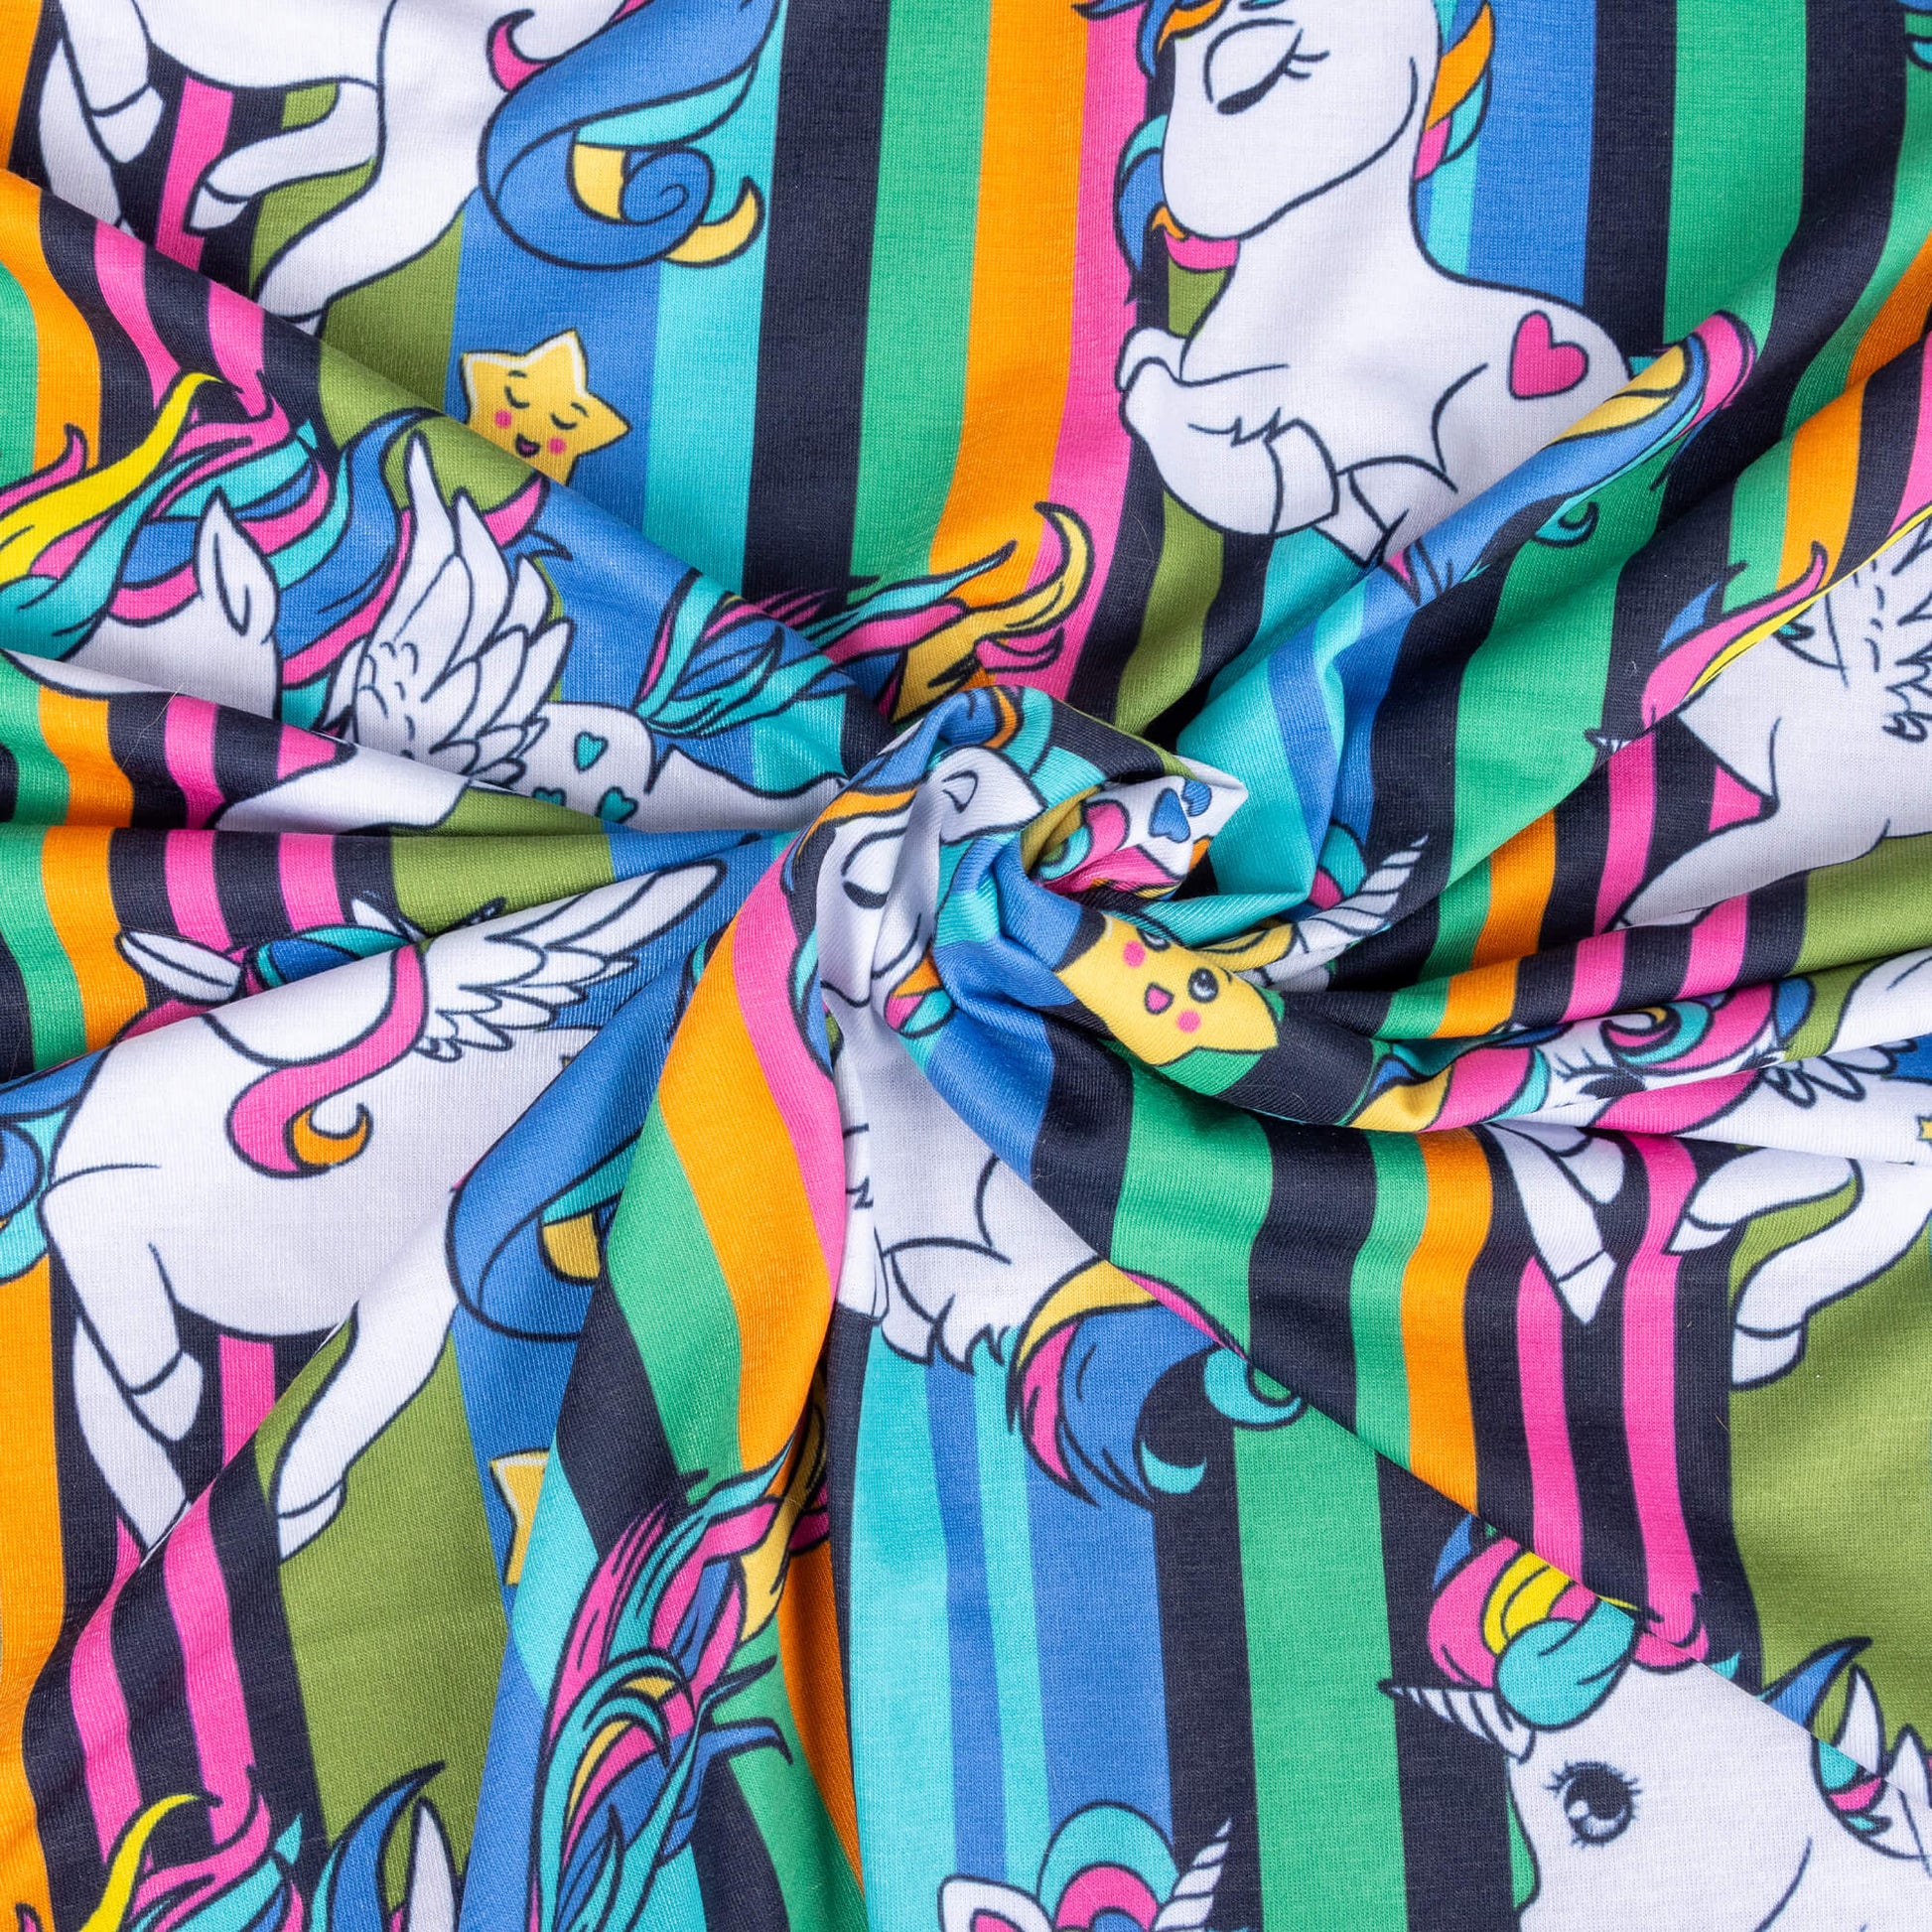 A swirl of Jersey fabric featuring unicorns and flying unicorns with pink, blue and yellow flowing hair against a background of pink, blue, yellow, green and black stripes. There are also cute smiley stars 